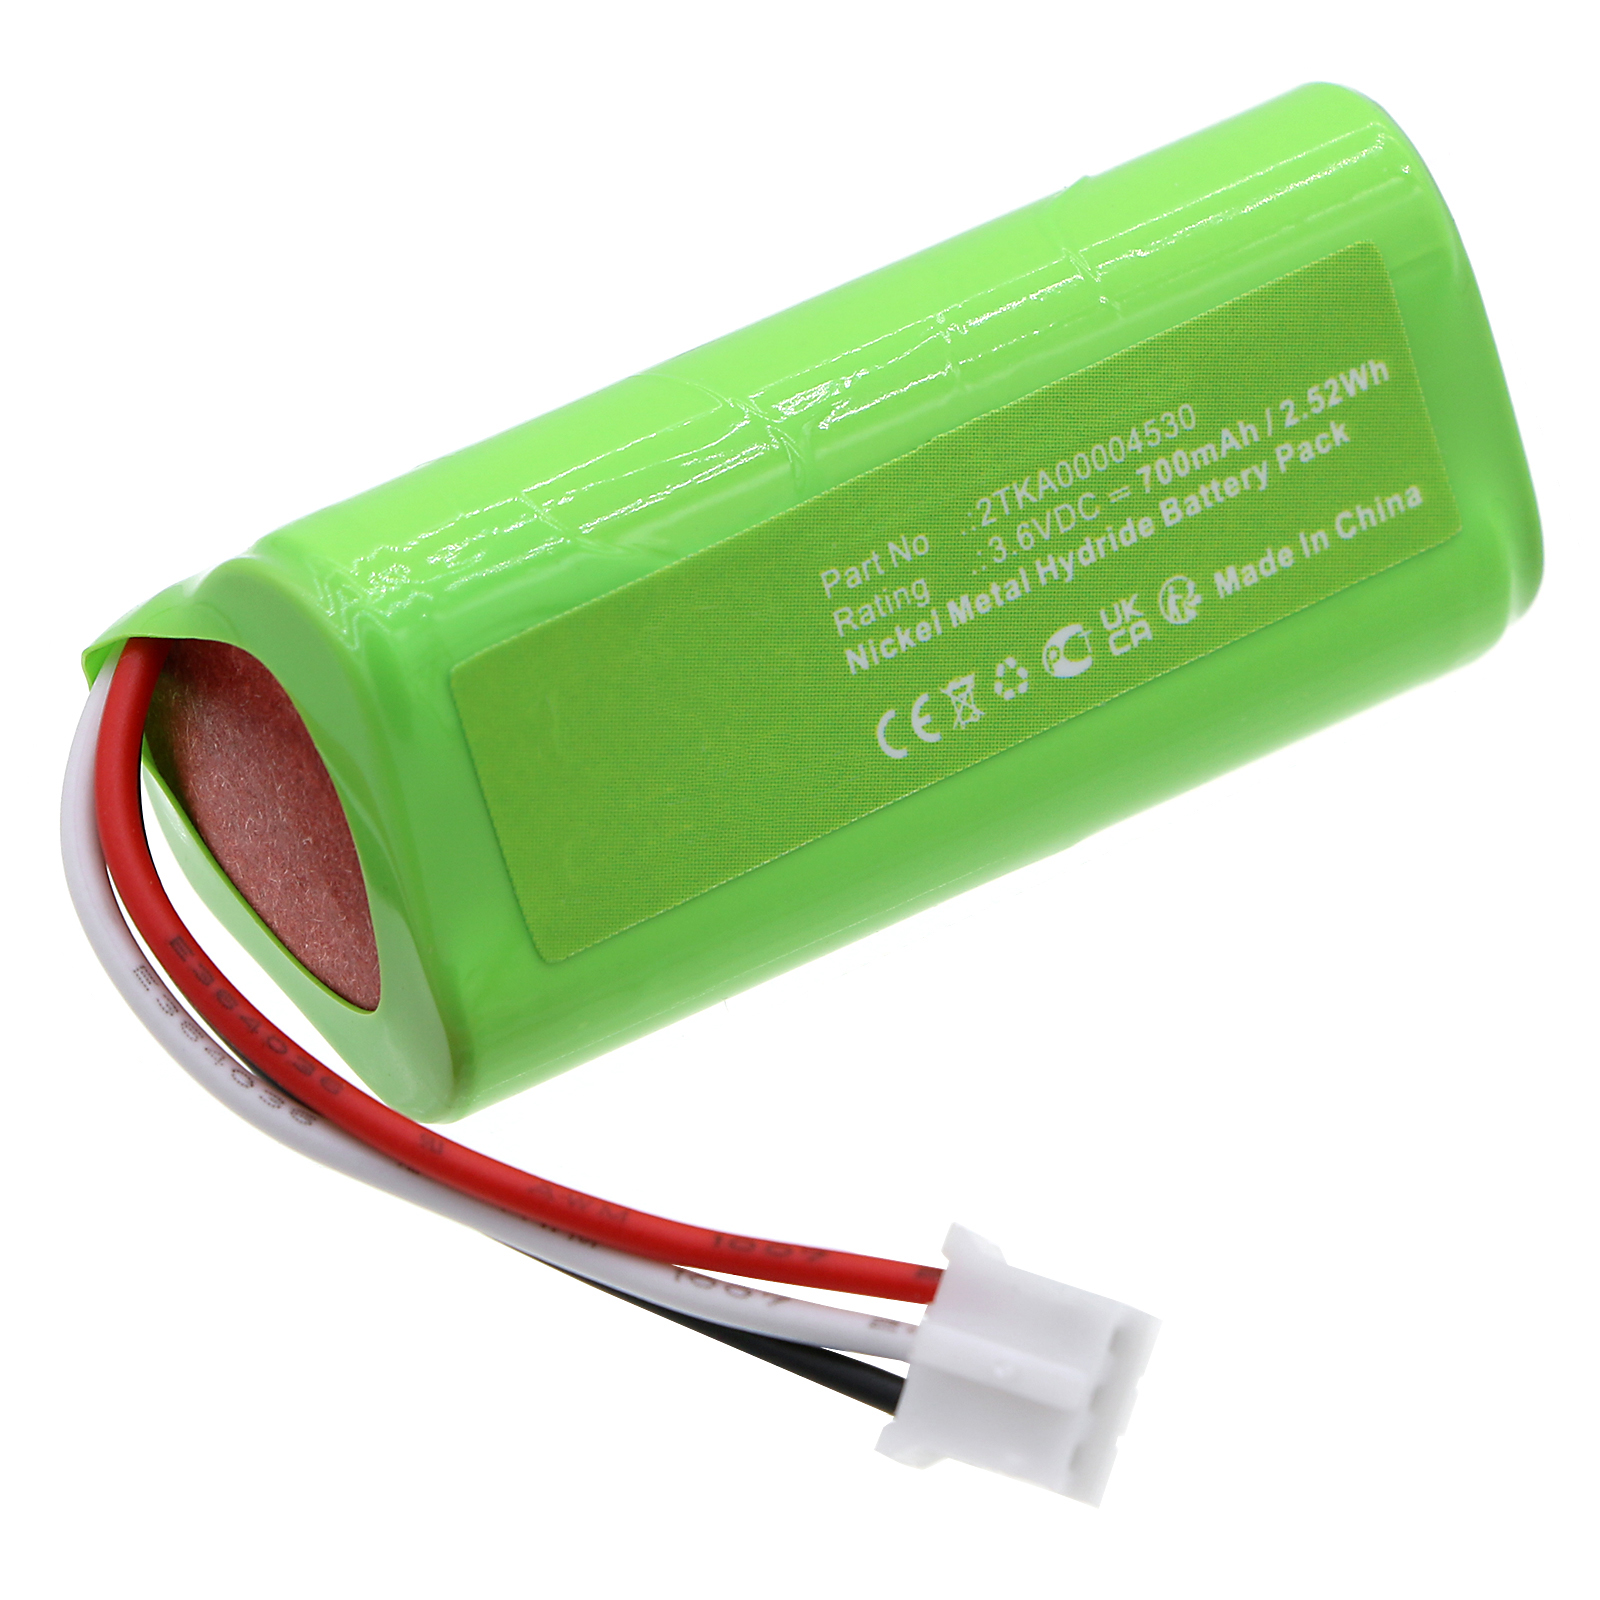 Synergy Digital Emergency Lighting Battery, Compatible with Busch-Jaeger 2TKA00004530 Emergency Lighting Battery (Ni-MH, 3.6V, 700mAh)